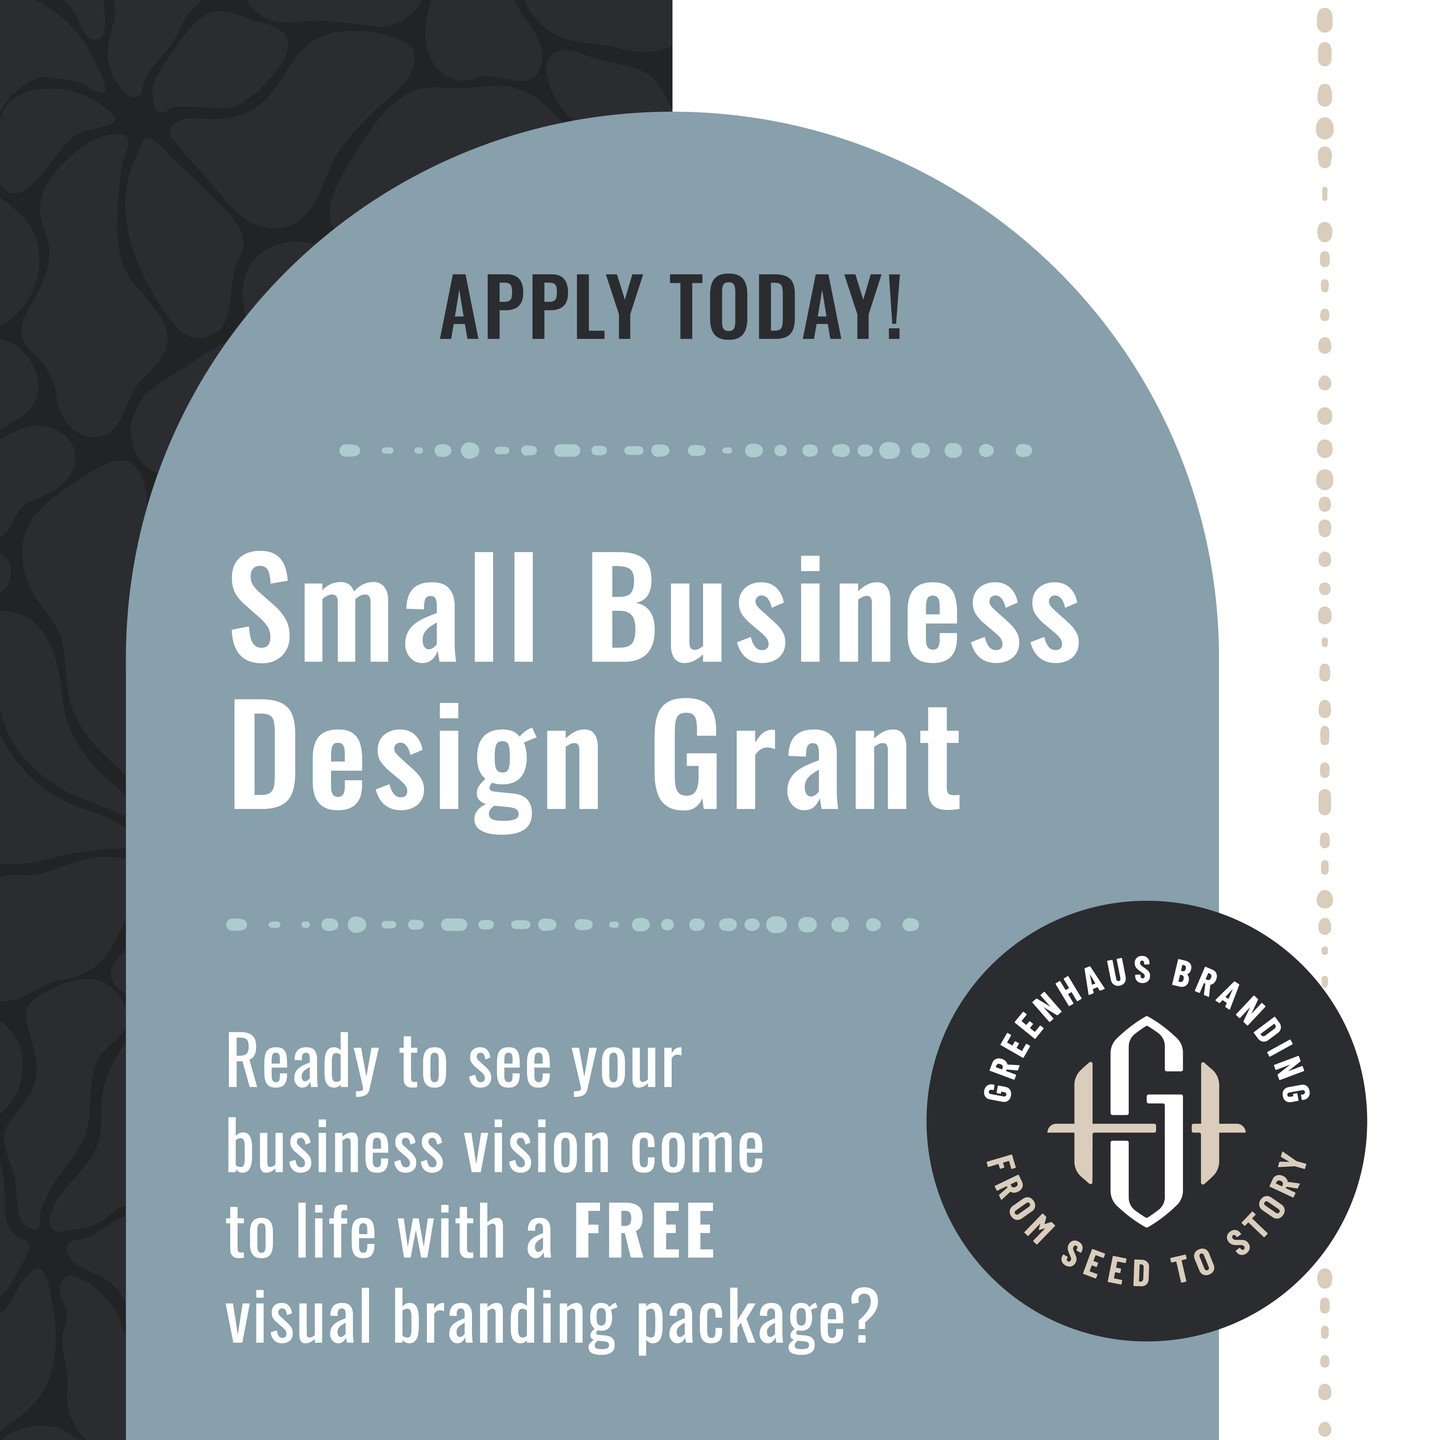 Calling all aspiring entrepreneurs in Union &amp; Mecklenburg County! Are you ready to bring your business idea to life? Greenhaus Branding is excited to introduce the Small Business Design Grant, offering a comprehensive branding starter package for